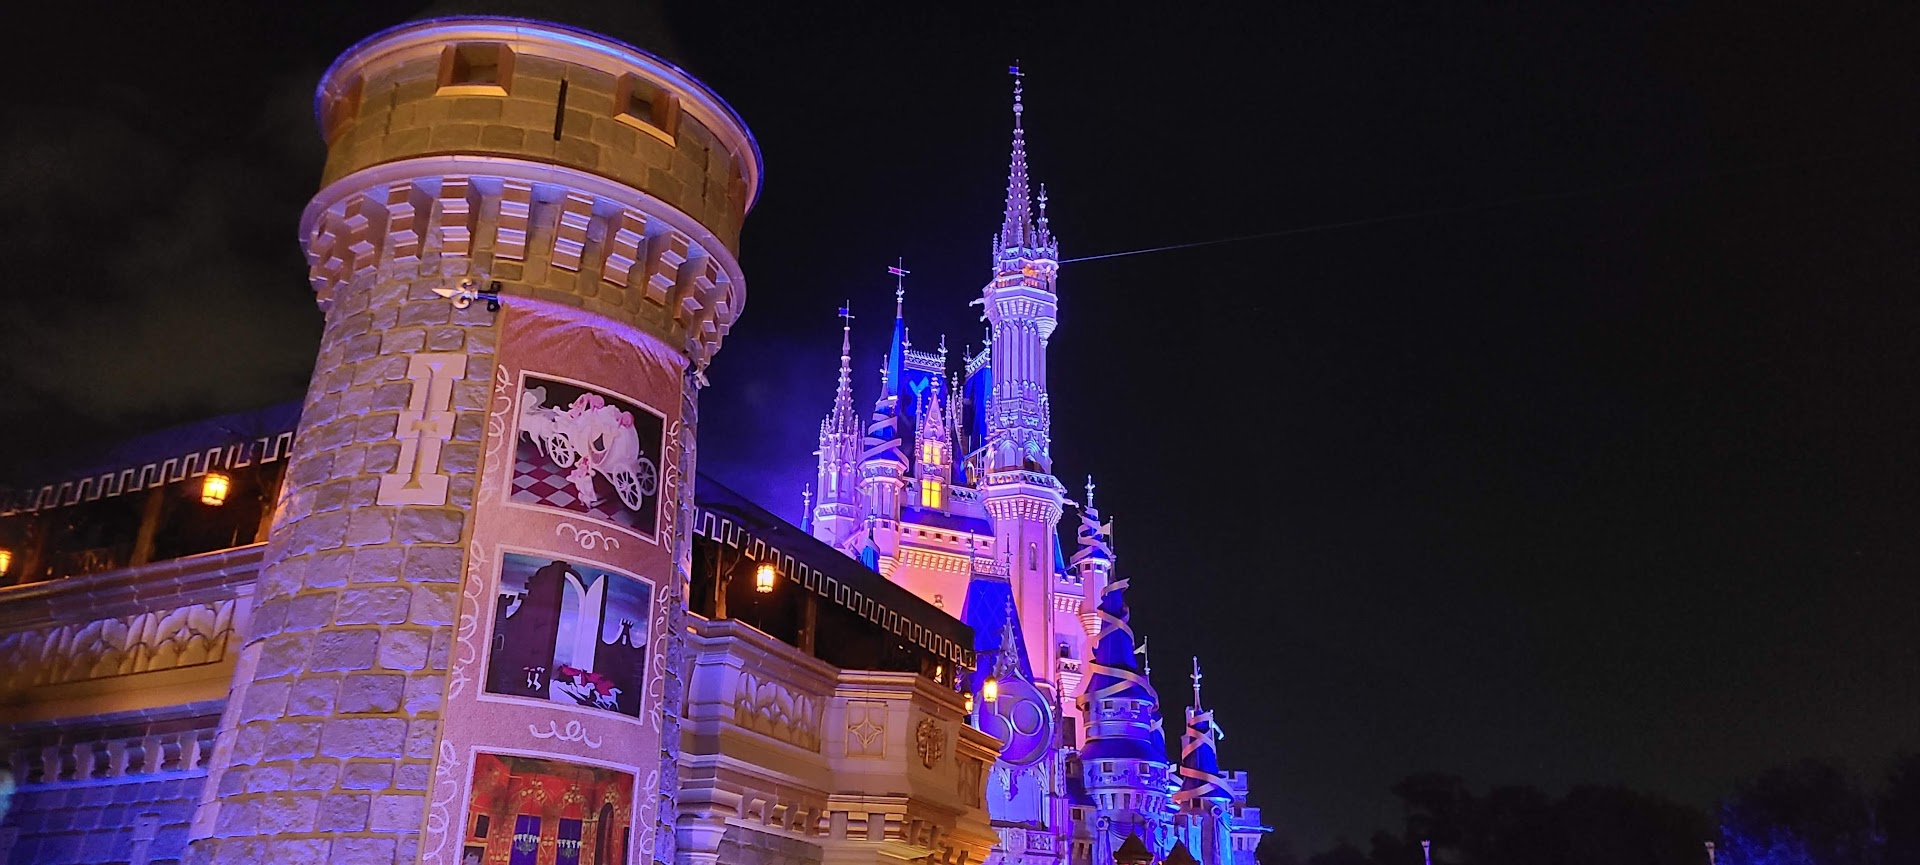 Can You Stay In The Castle At Disney World Without Winning Contest? Tips 3